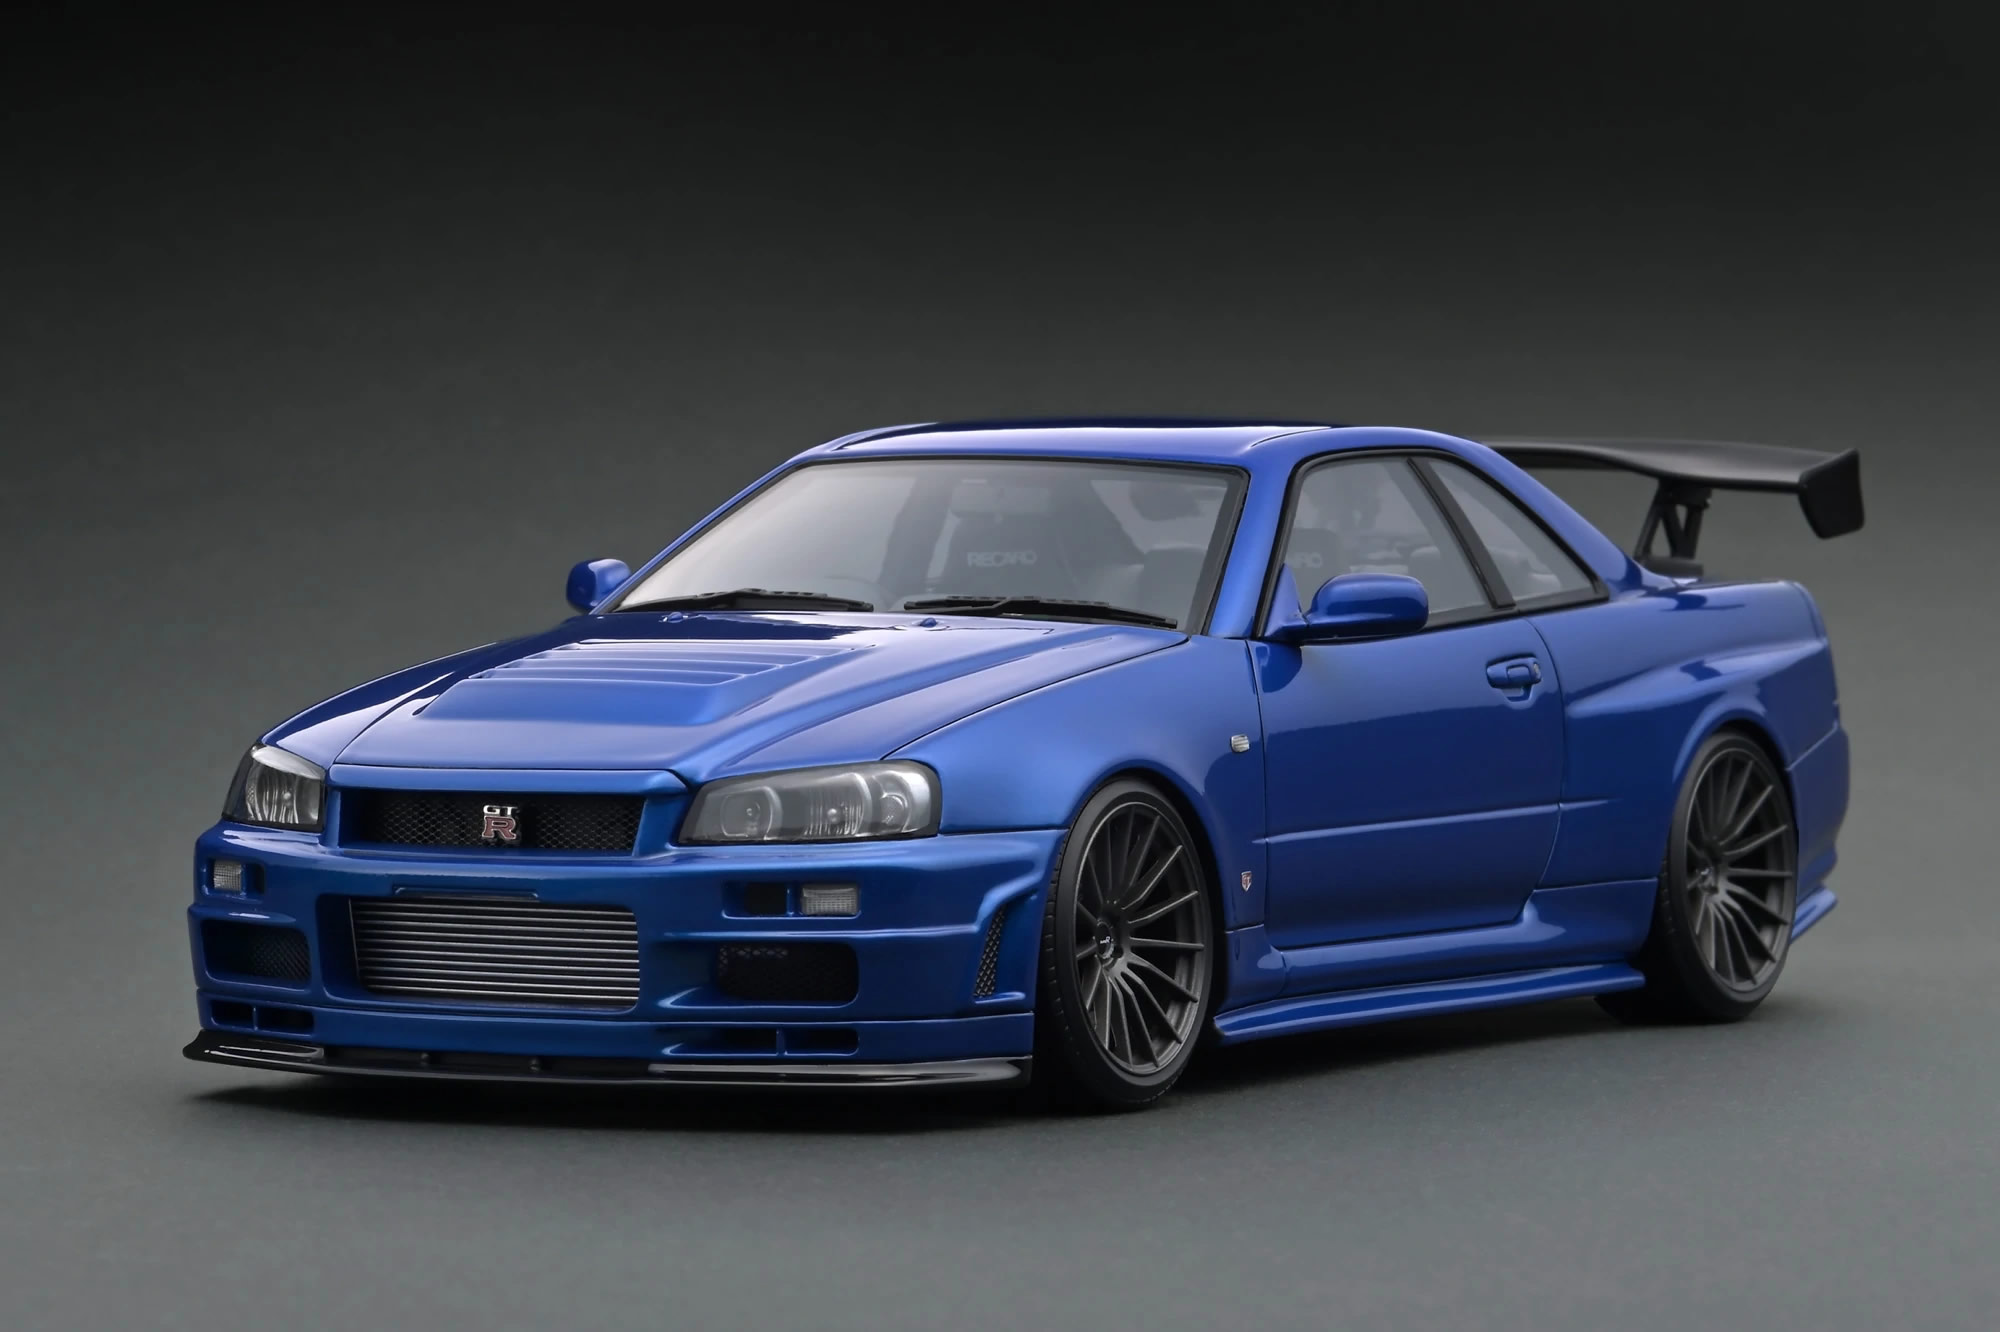 IG1830  <font color=red>1/18</font> Nismo R34 GT-R R-tune ɳ Nismo GT-R(R34) R-tune ư ɫBayside Blue RS05RR  18 Ӣ糵֣ǹɫԭղɢƶǯɫGT ֱܡRECARO ΣNismo ת